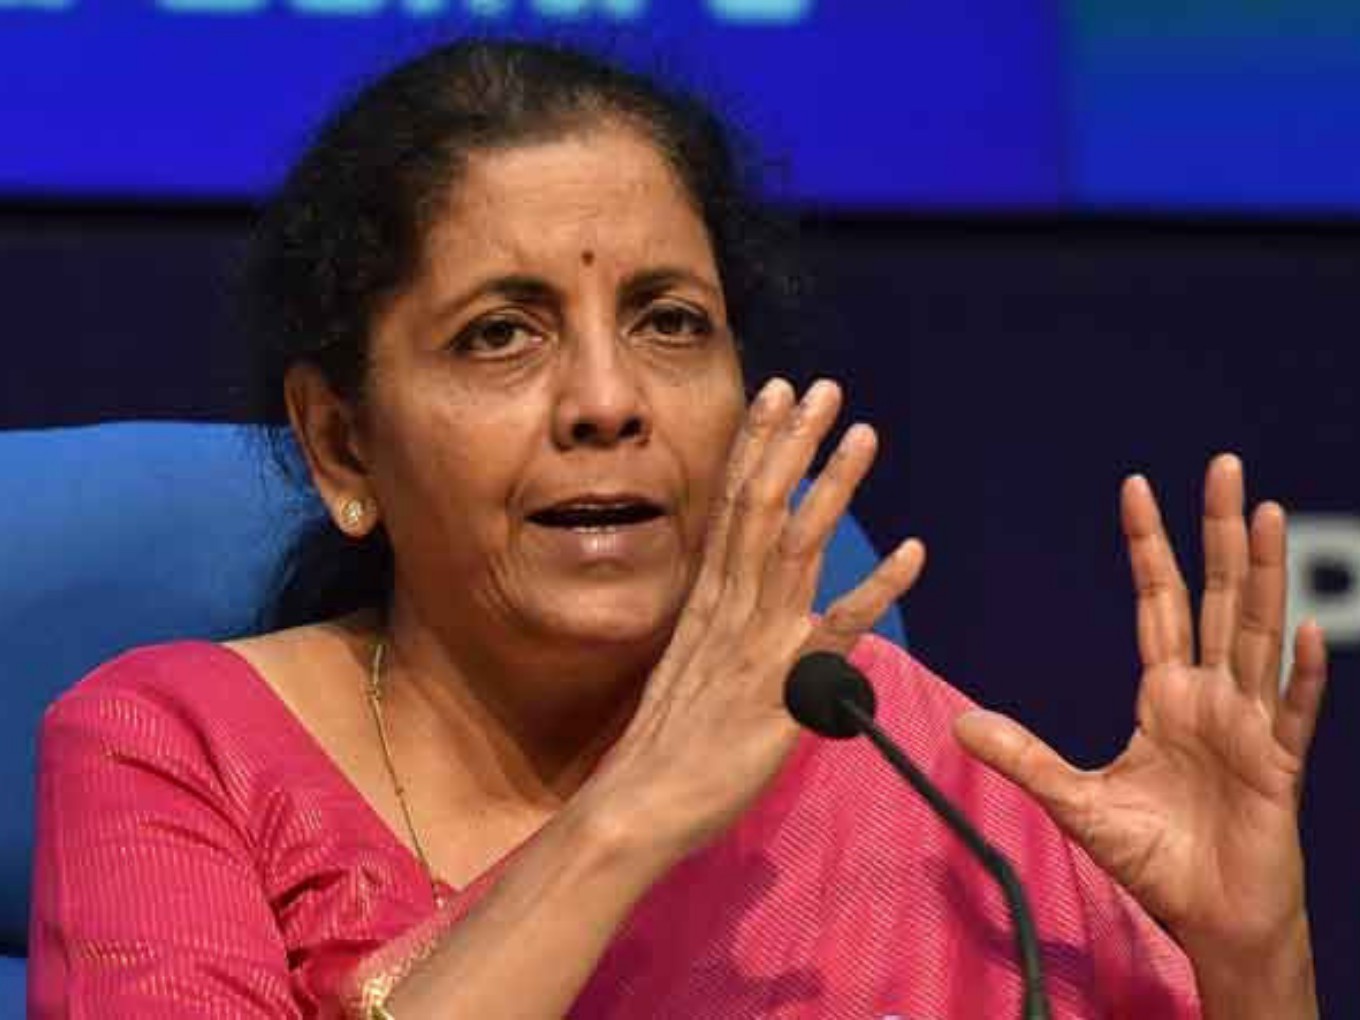 Union Budget 2020: Sitharaman To Seek Inputs From Startups On Economic Revival